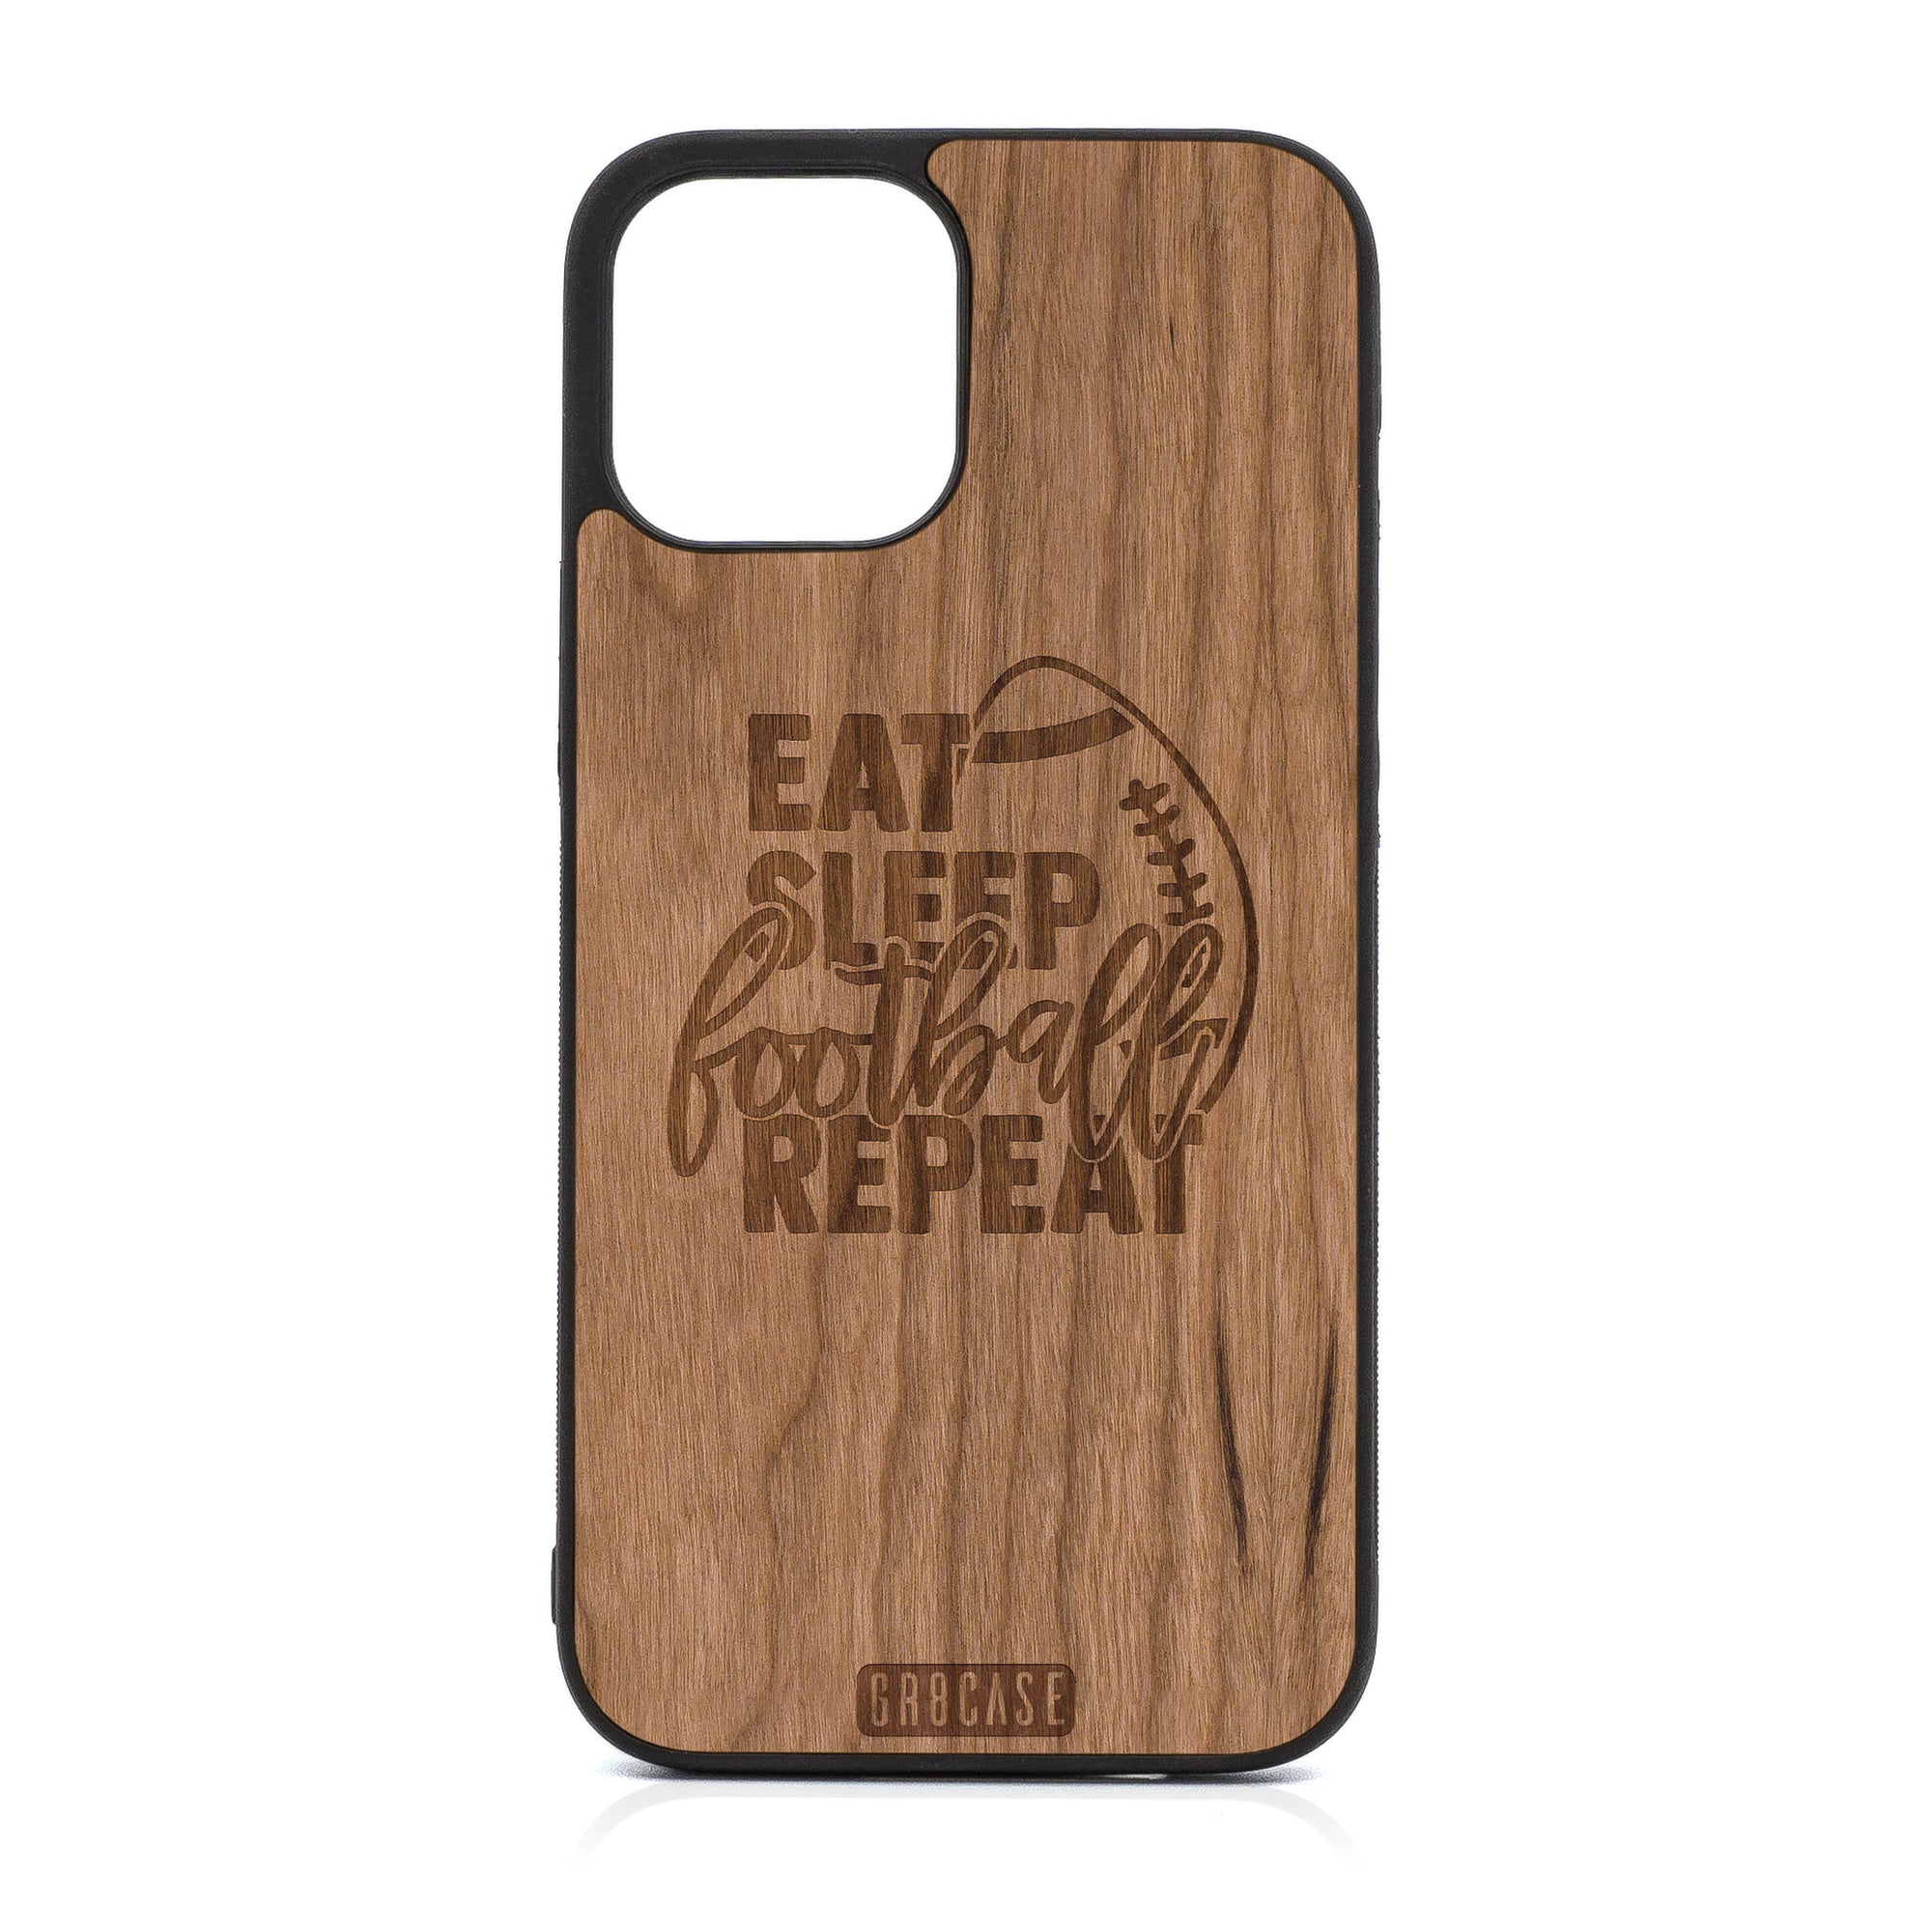 Eat Sleep Football Repeat Design Wood Case For iPhone 12 Pro Max